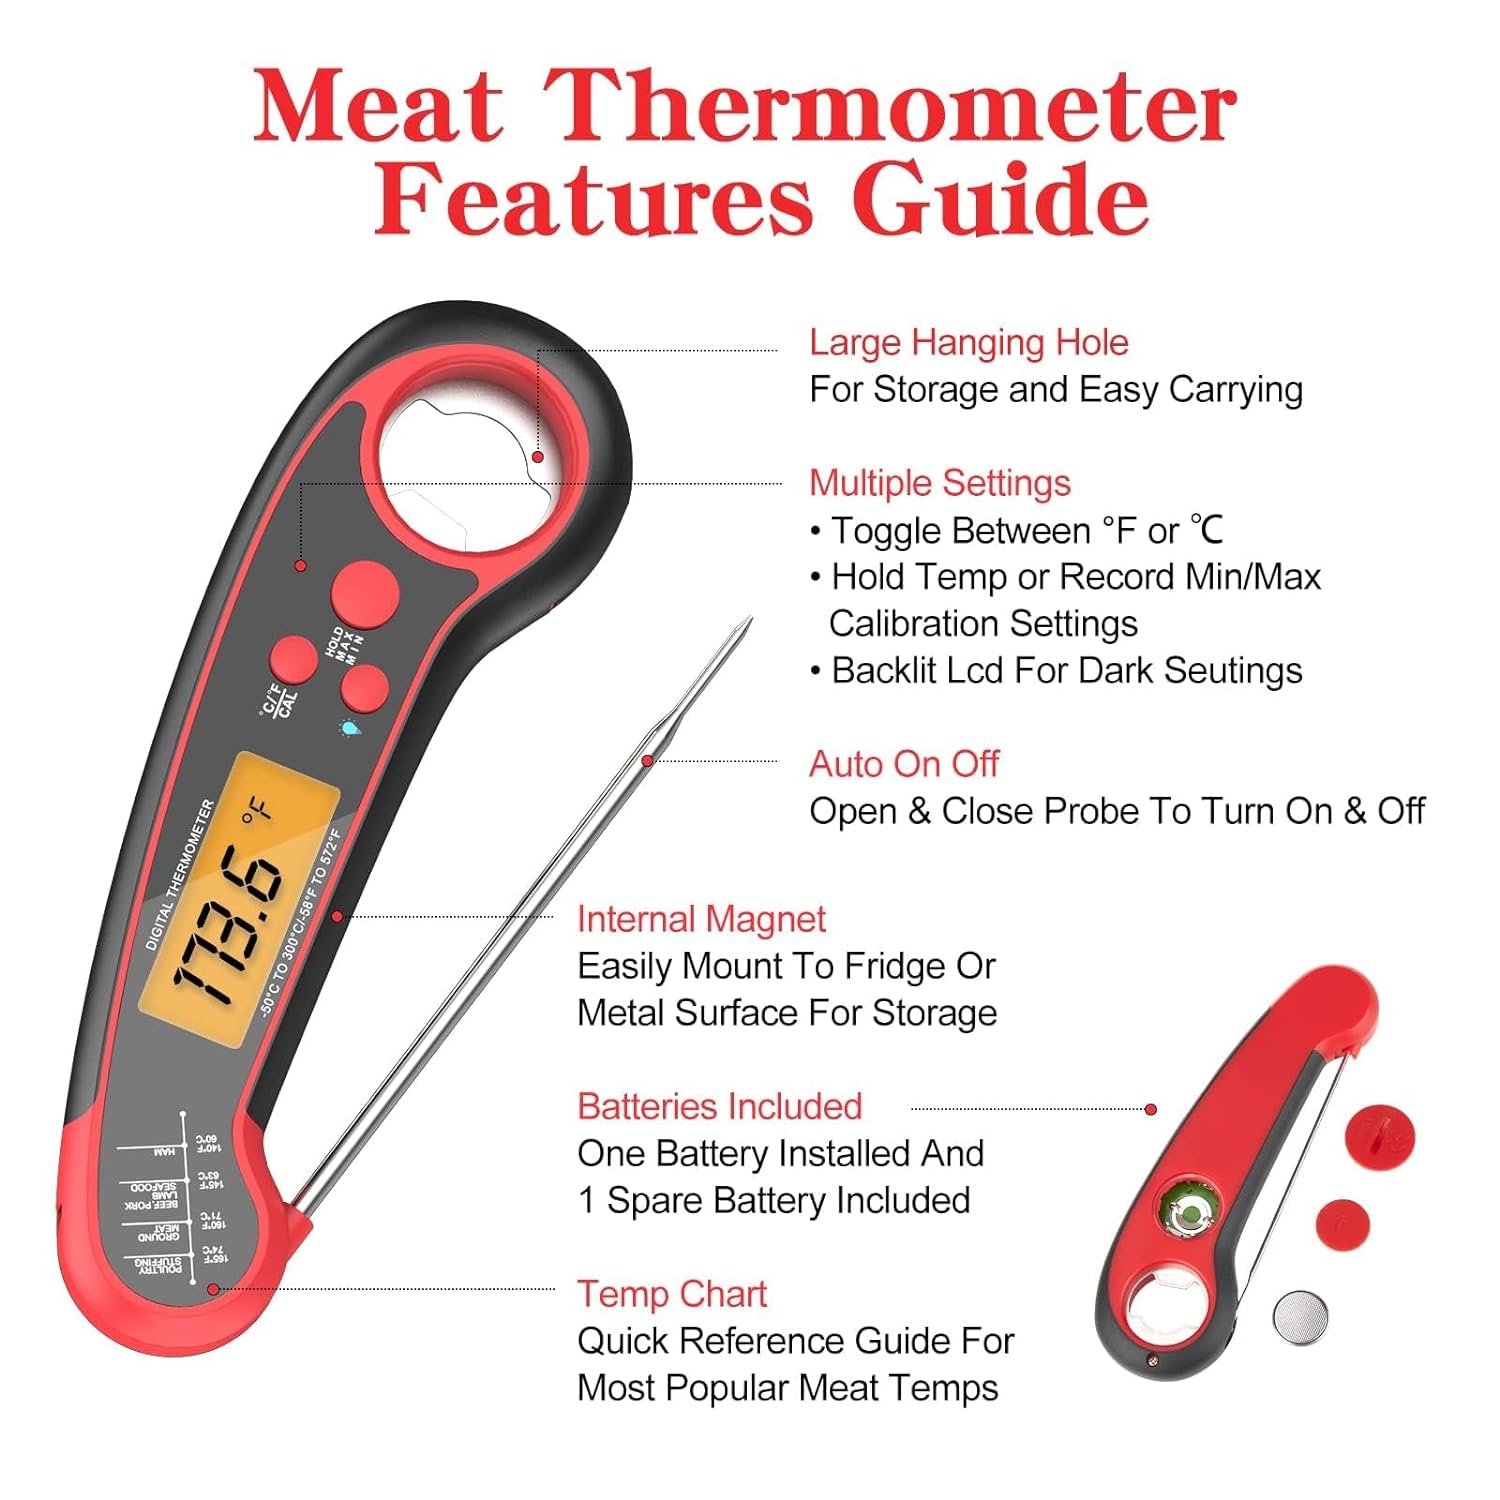 Meat Thermometer, Meat thermometers for Grilling Ultra-Fast Waterproof Meat Thermometer Digital with Backlight, Magnet, and Foldable Probe - Perfect for Grilling, Cooking, BBQ, Candy, and Deep Fry